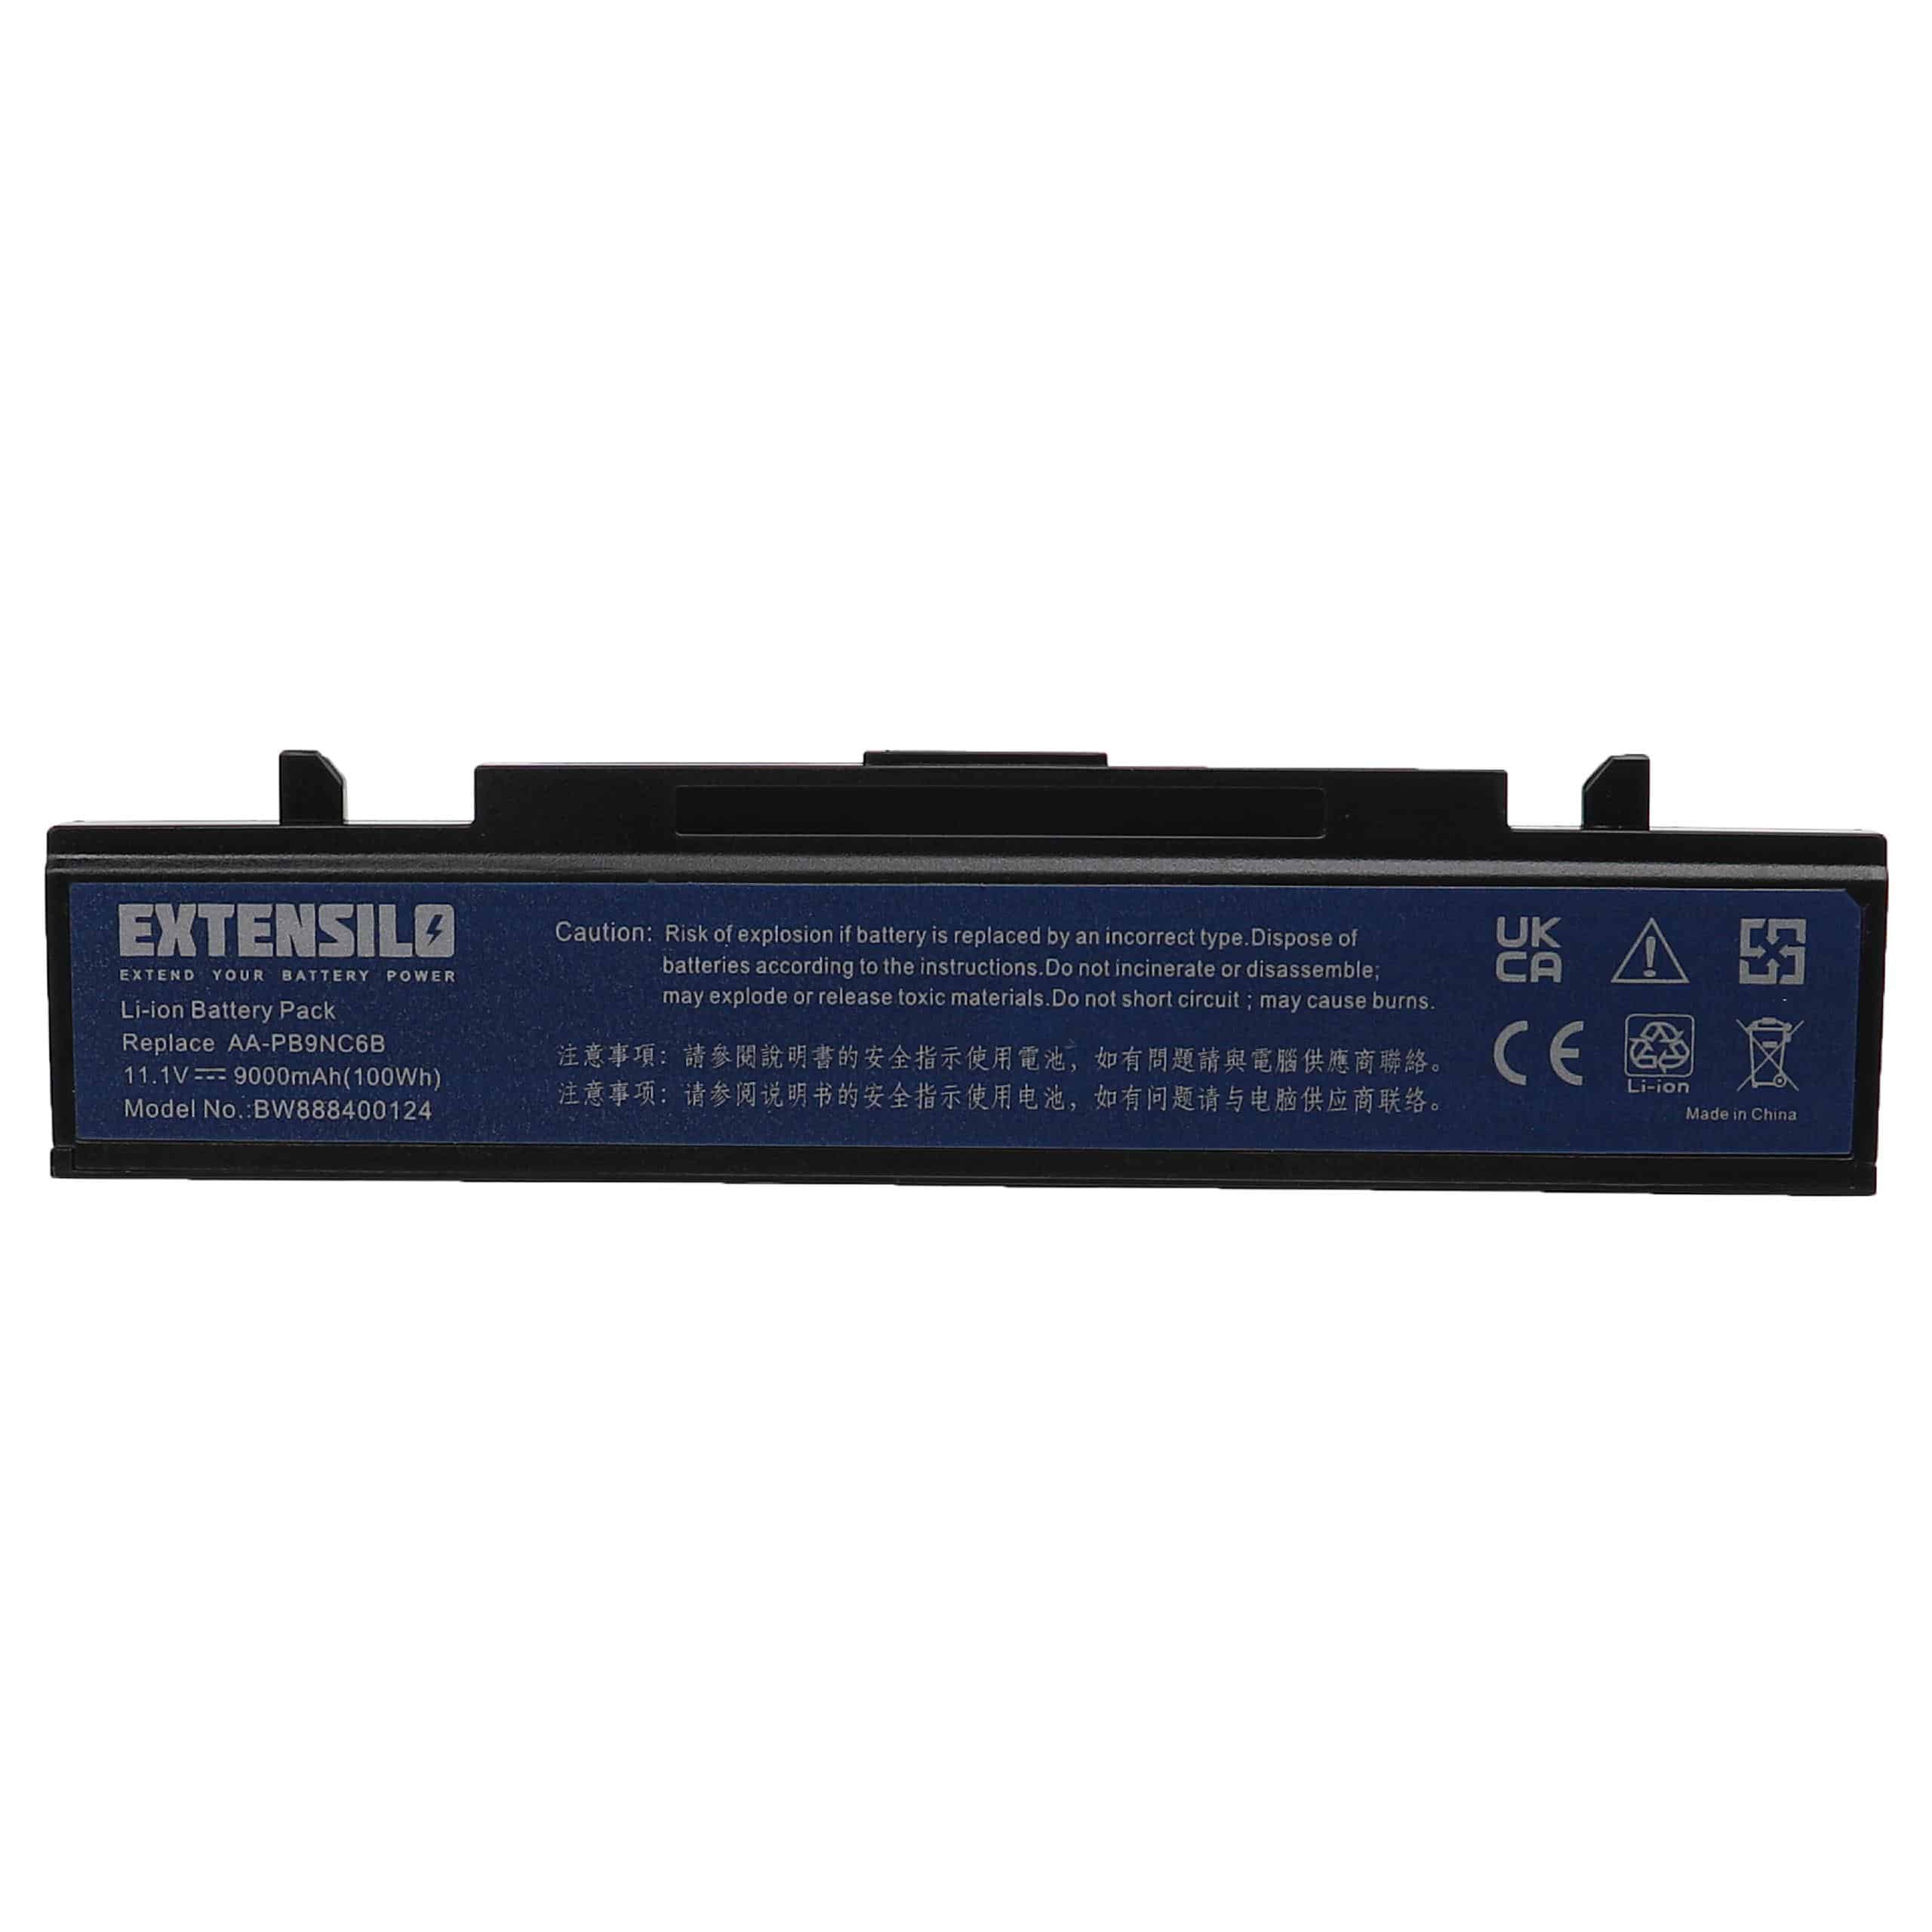 Notebook Battery Replacement for Samsung AA-PL9NC2B, AA-PL9NC6W, AA-PL9NC6B - 9000mAh 11.1V Li-Ion